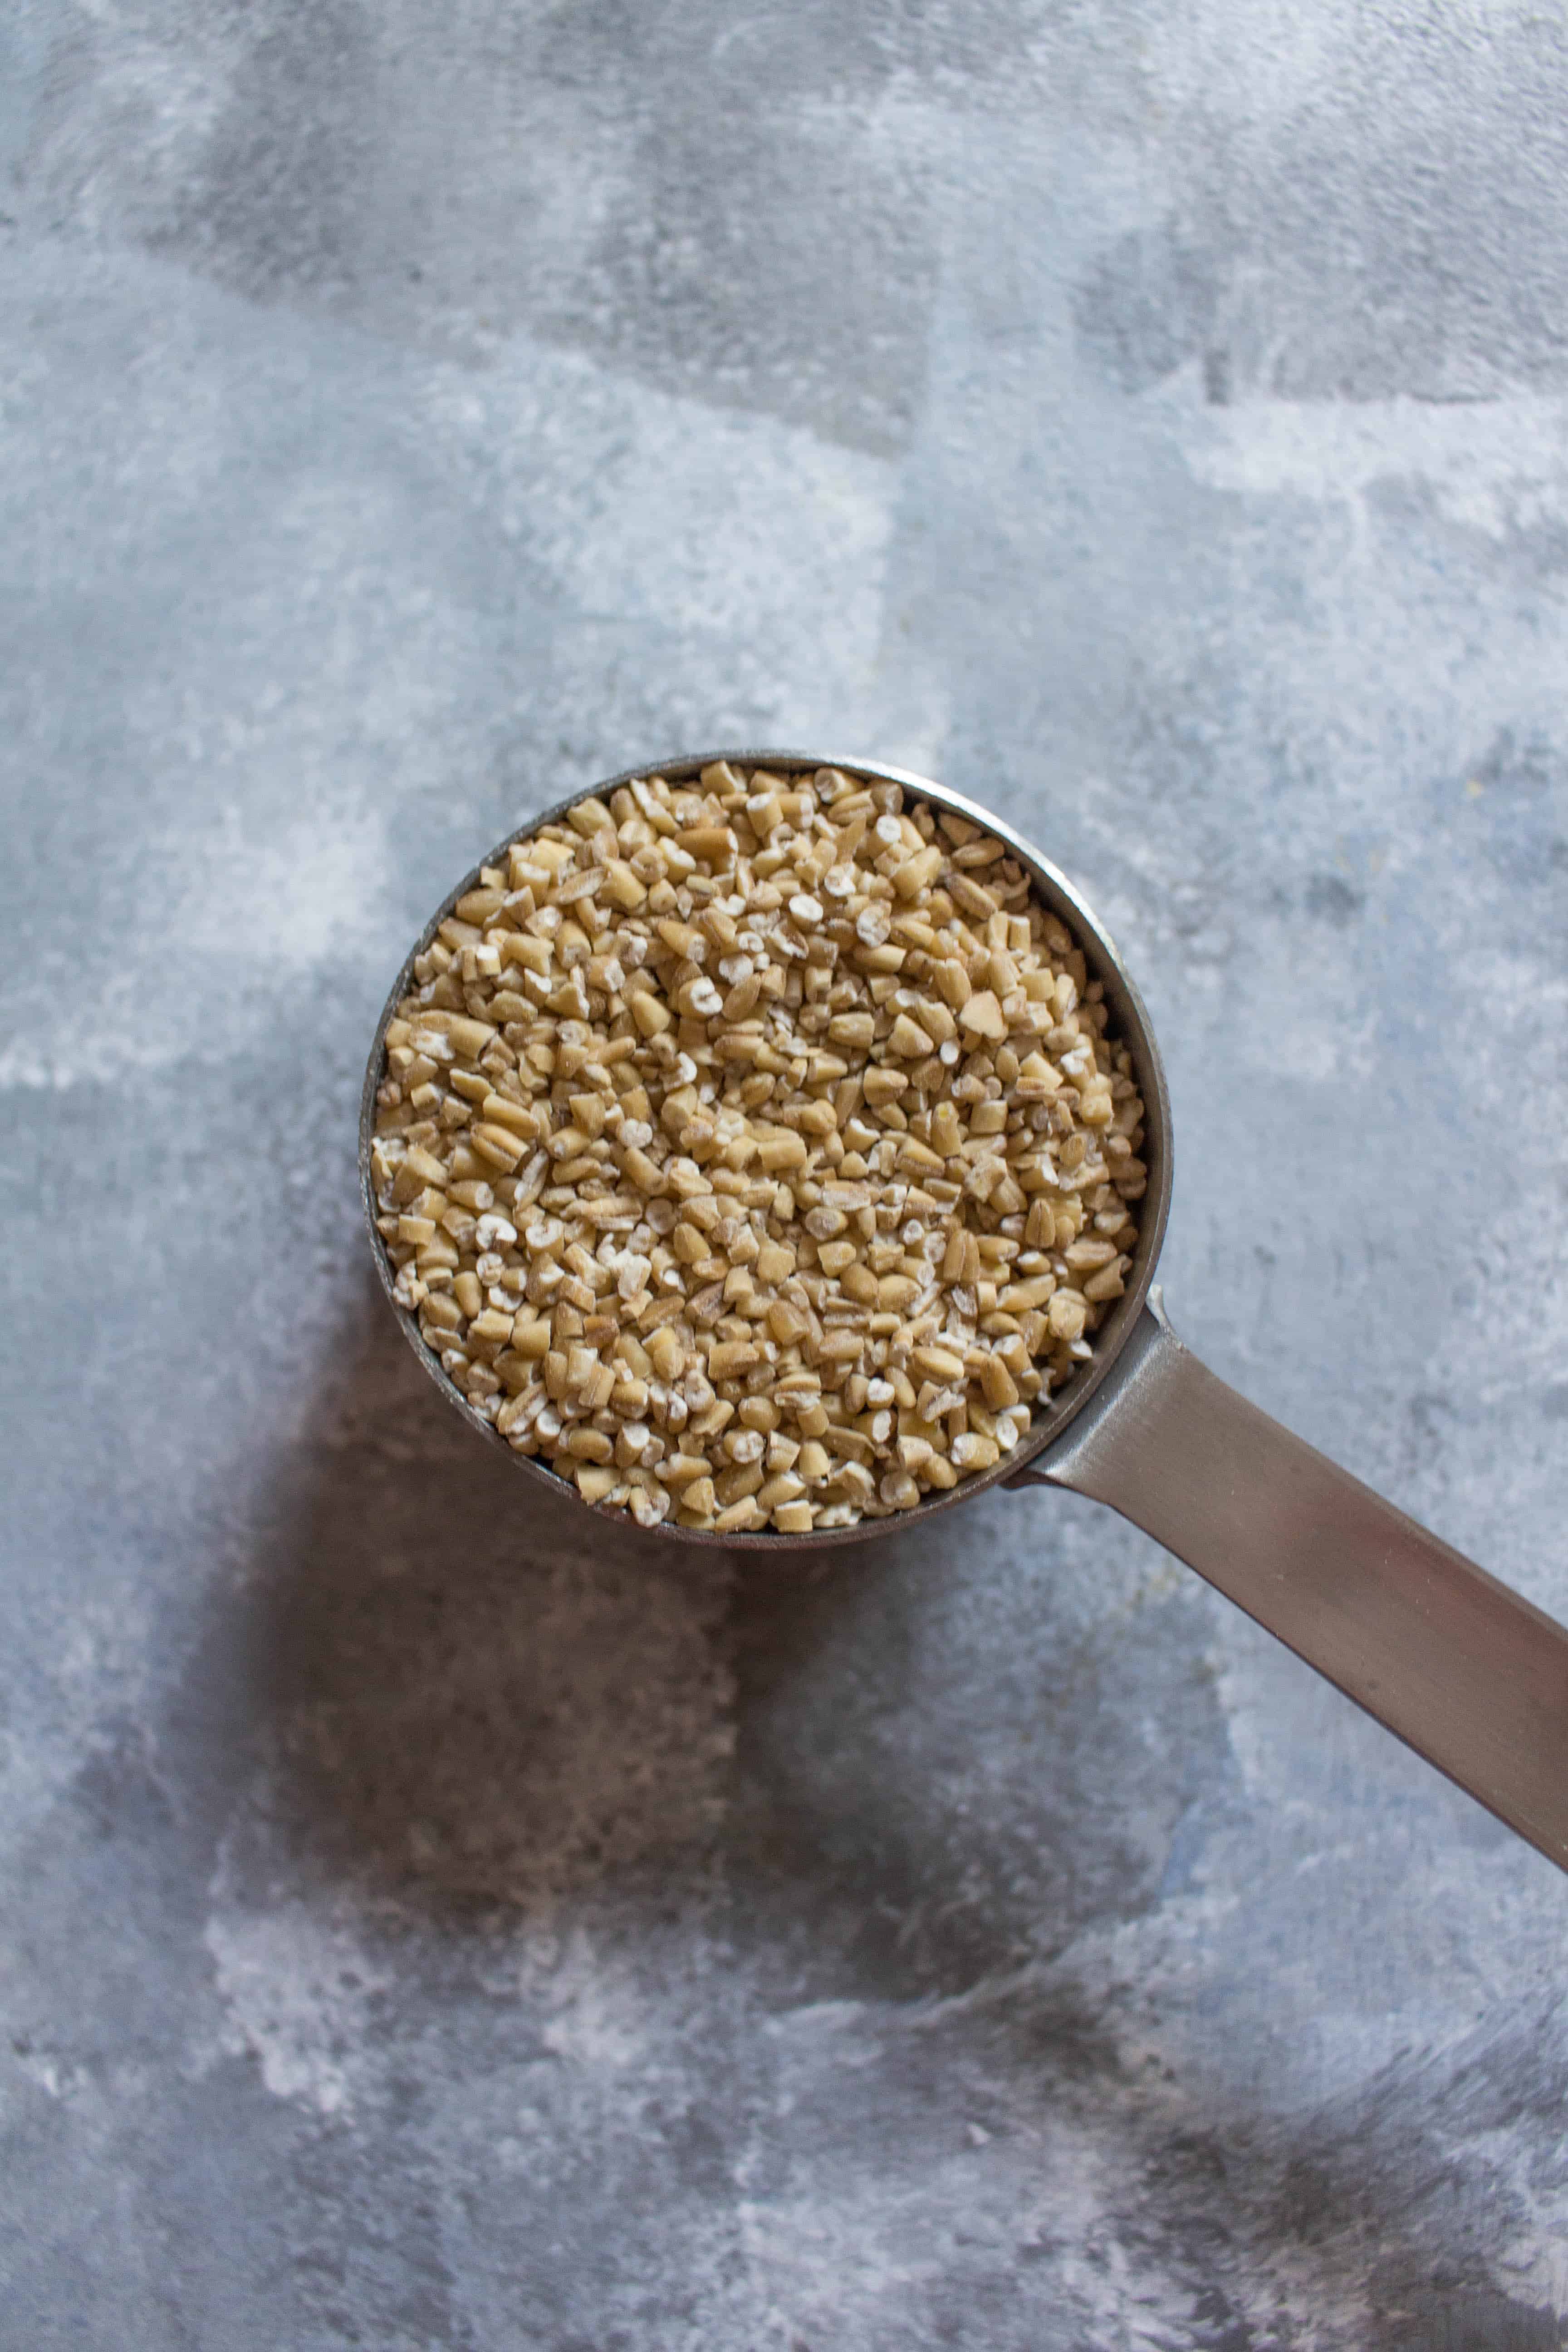 How to Make Overnight Steel Cut Oats (no cook)